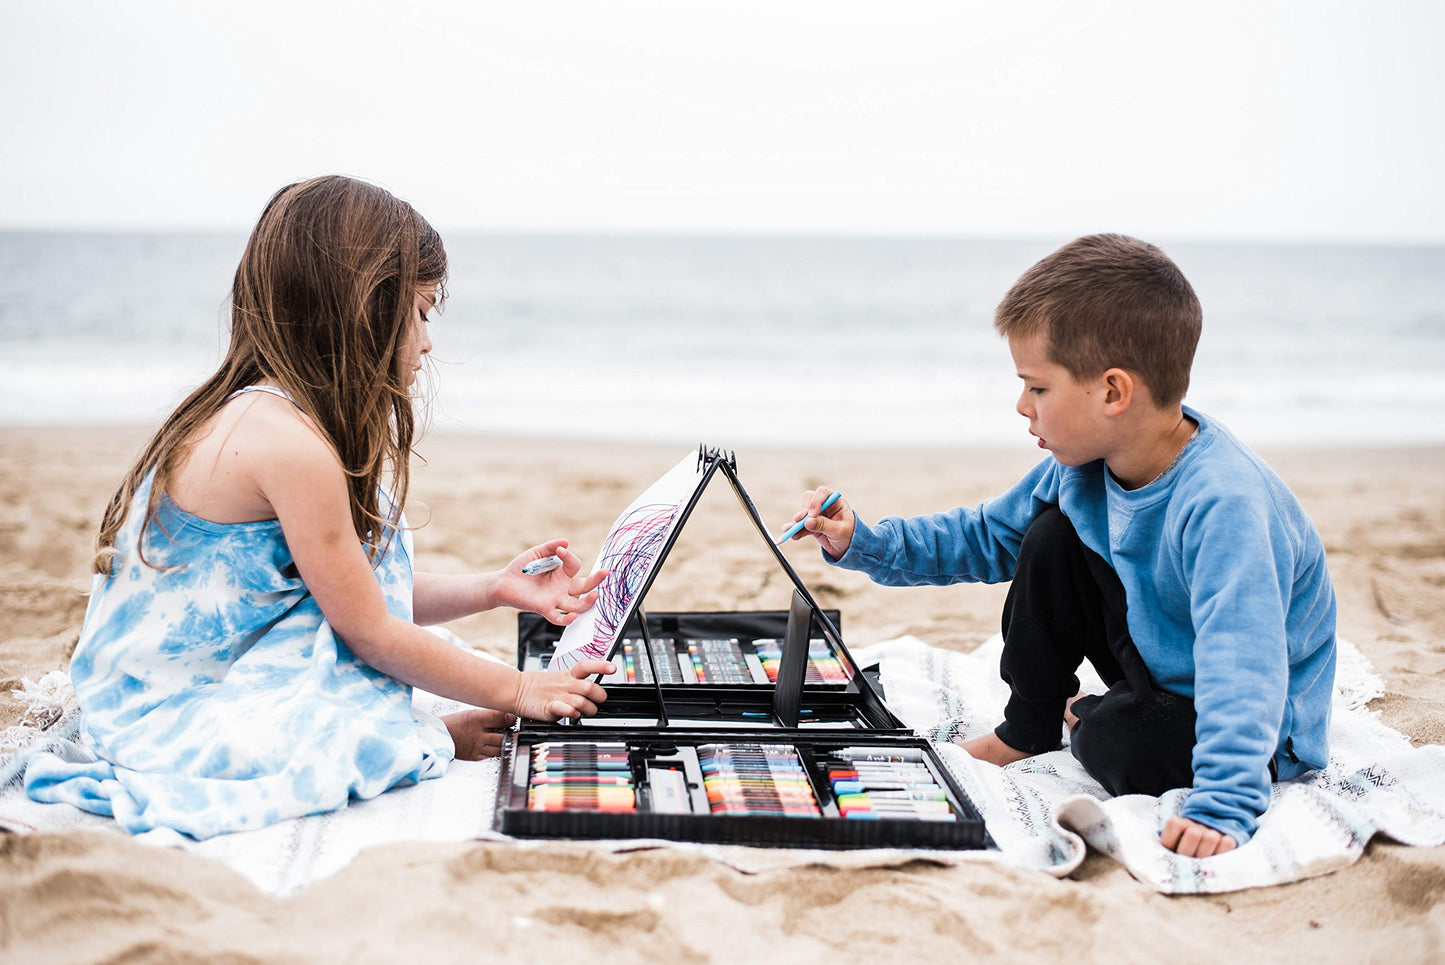 Art 101 Budding Artist 179 Piece Draw Paint and Create Art Set with Pop-Up Double-Sided Easel, Includes markers, crayons, paints, colored pencils,